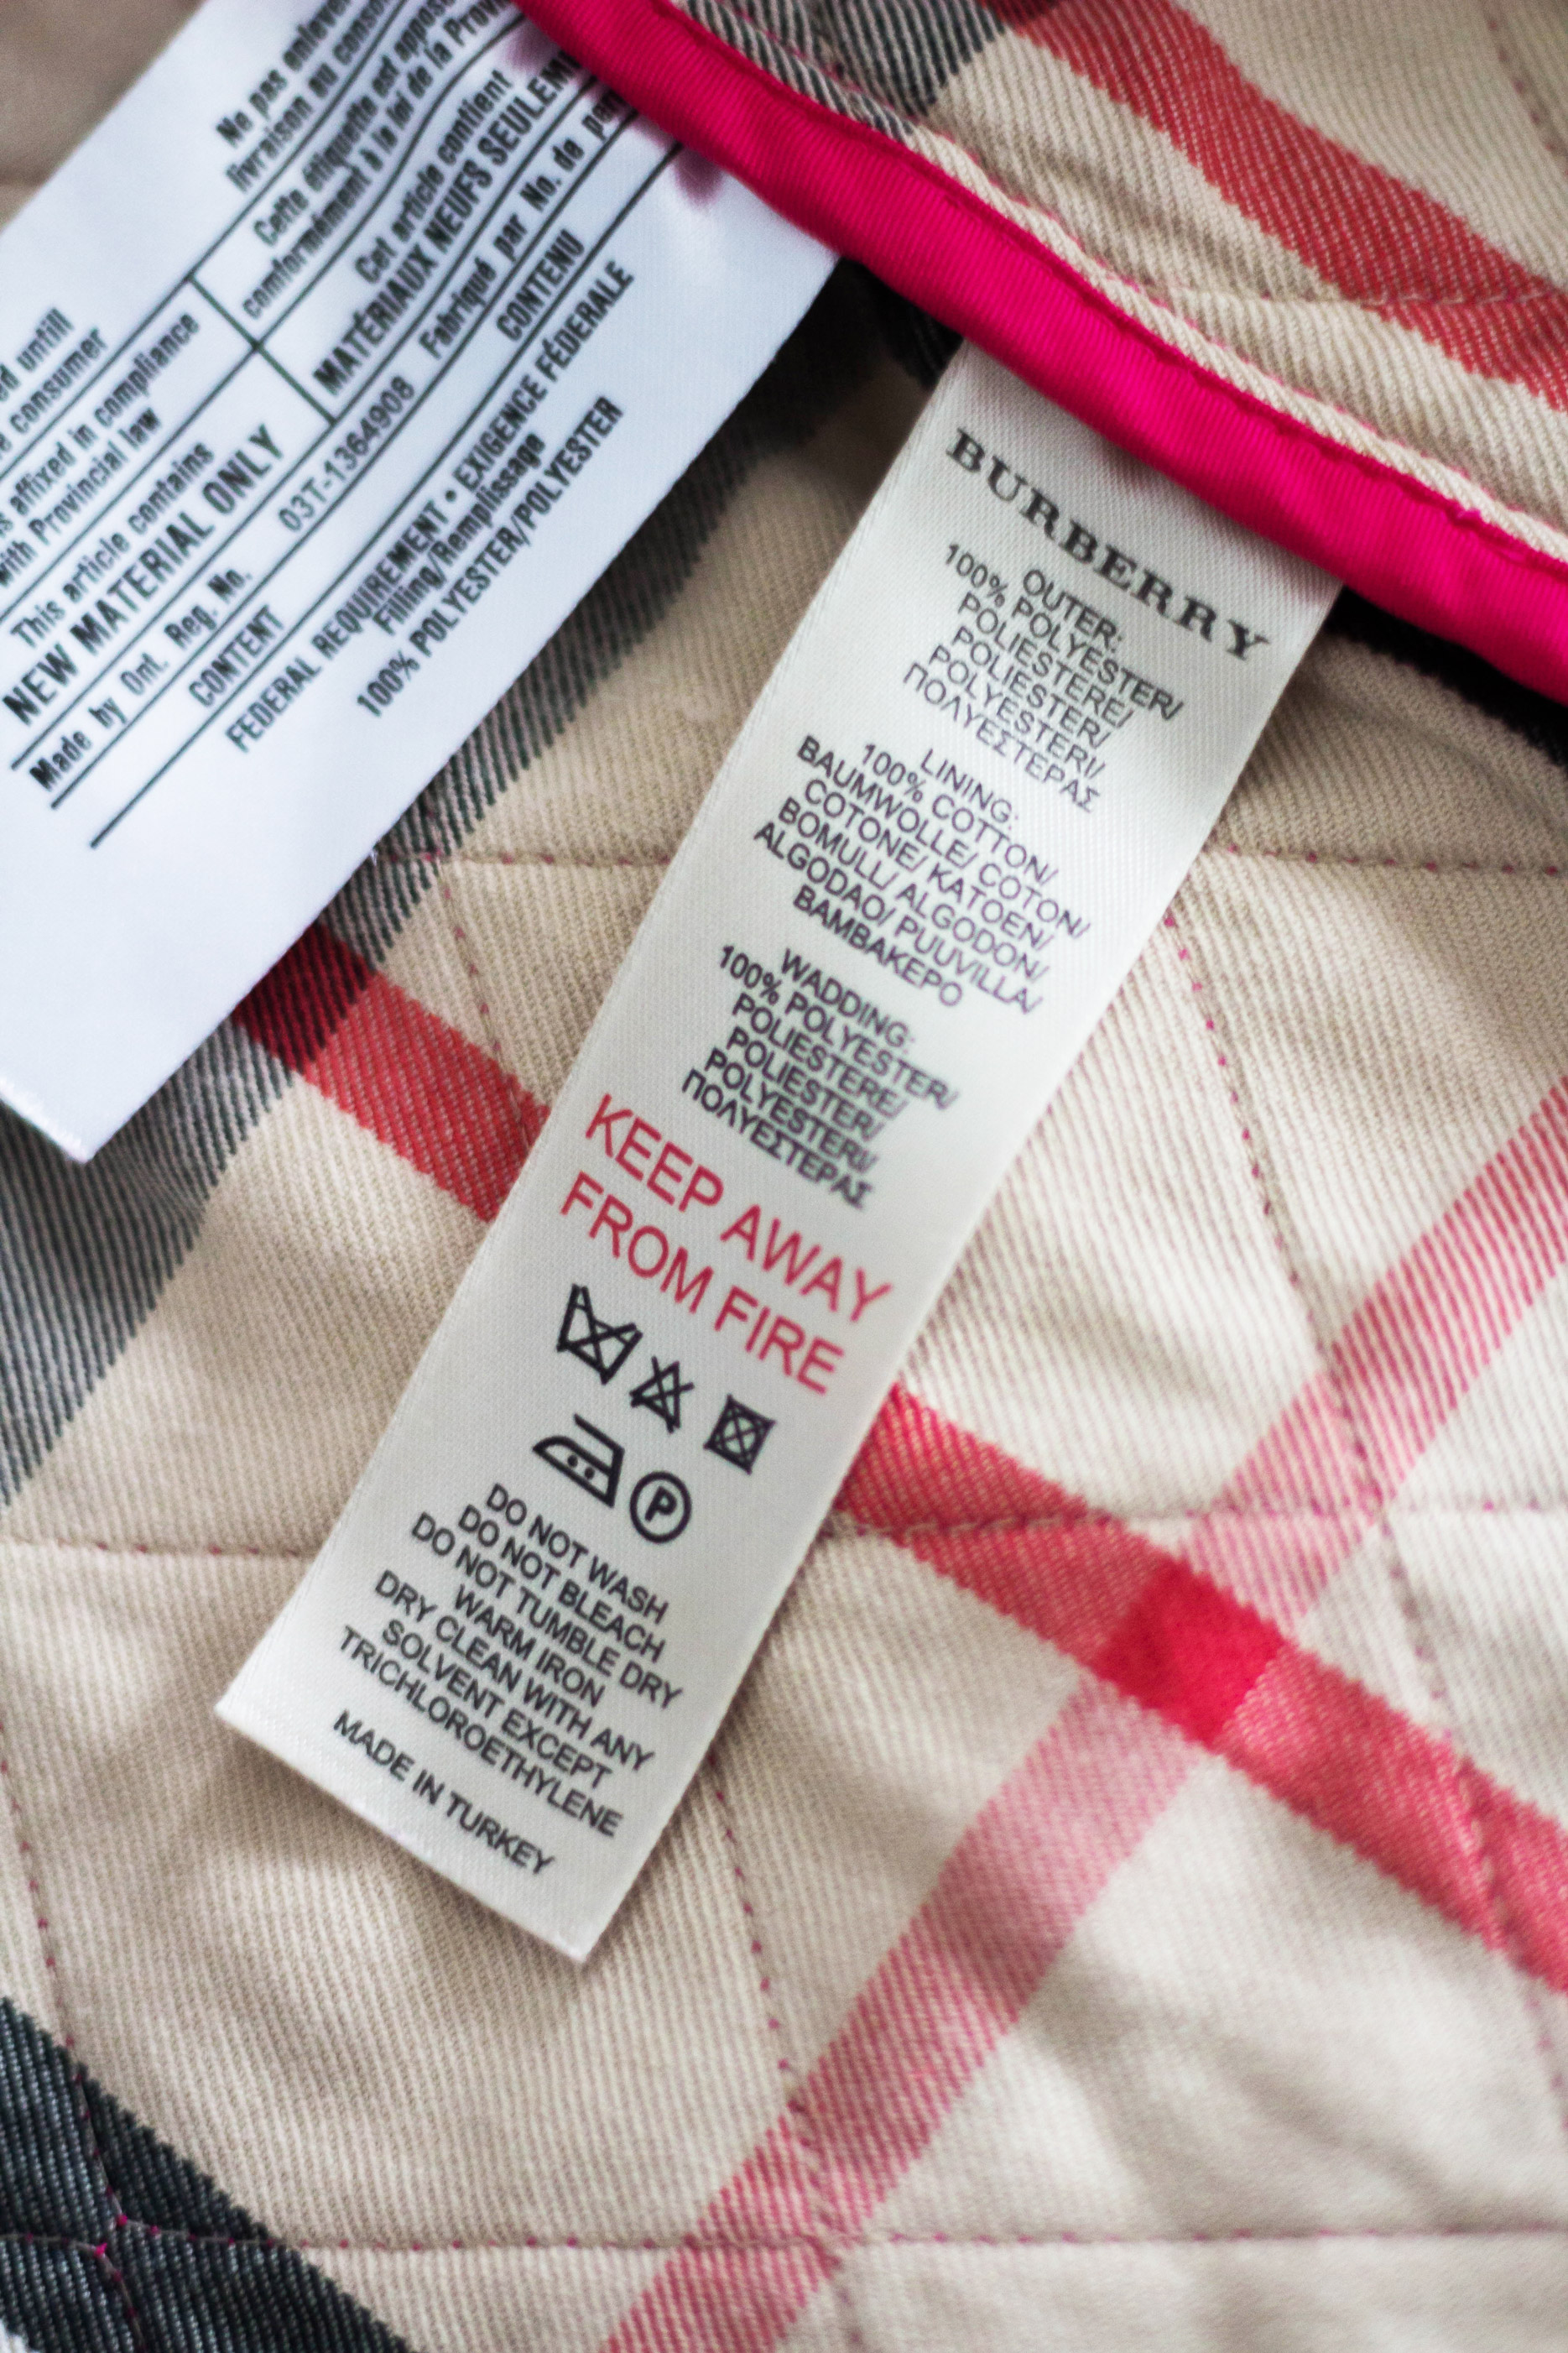 How to Authenticate Burberry Jackets | Recycled Roses